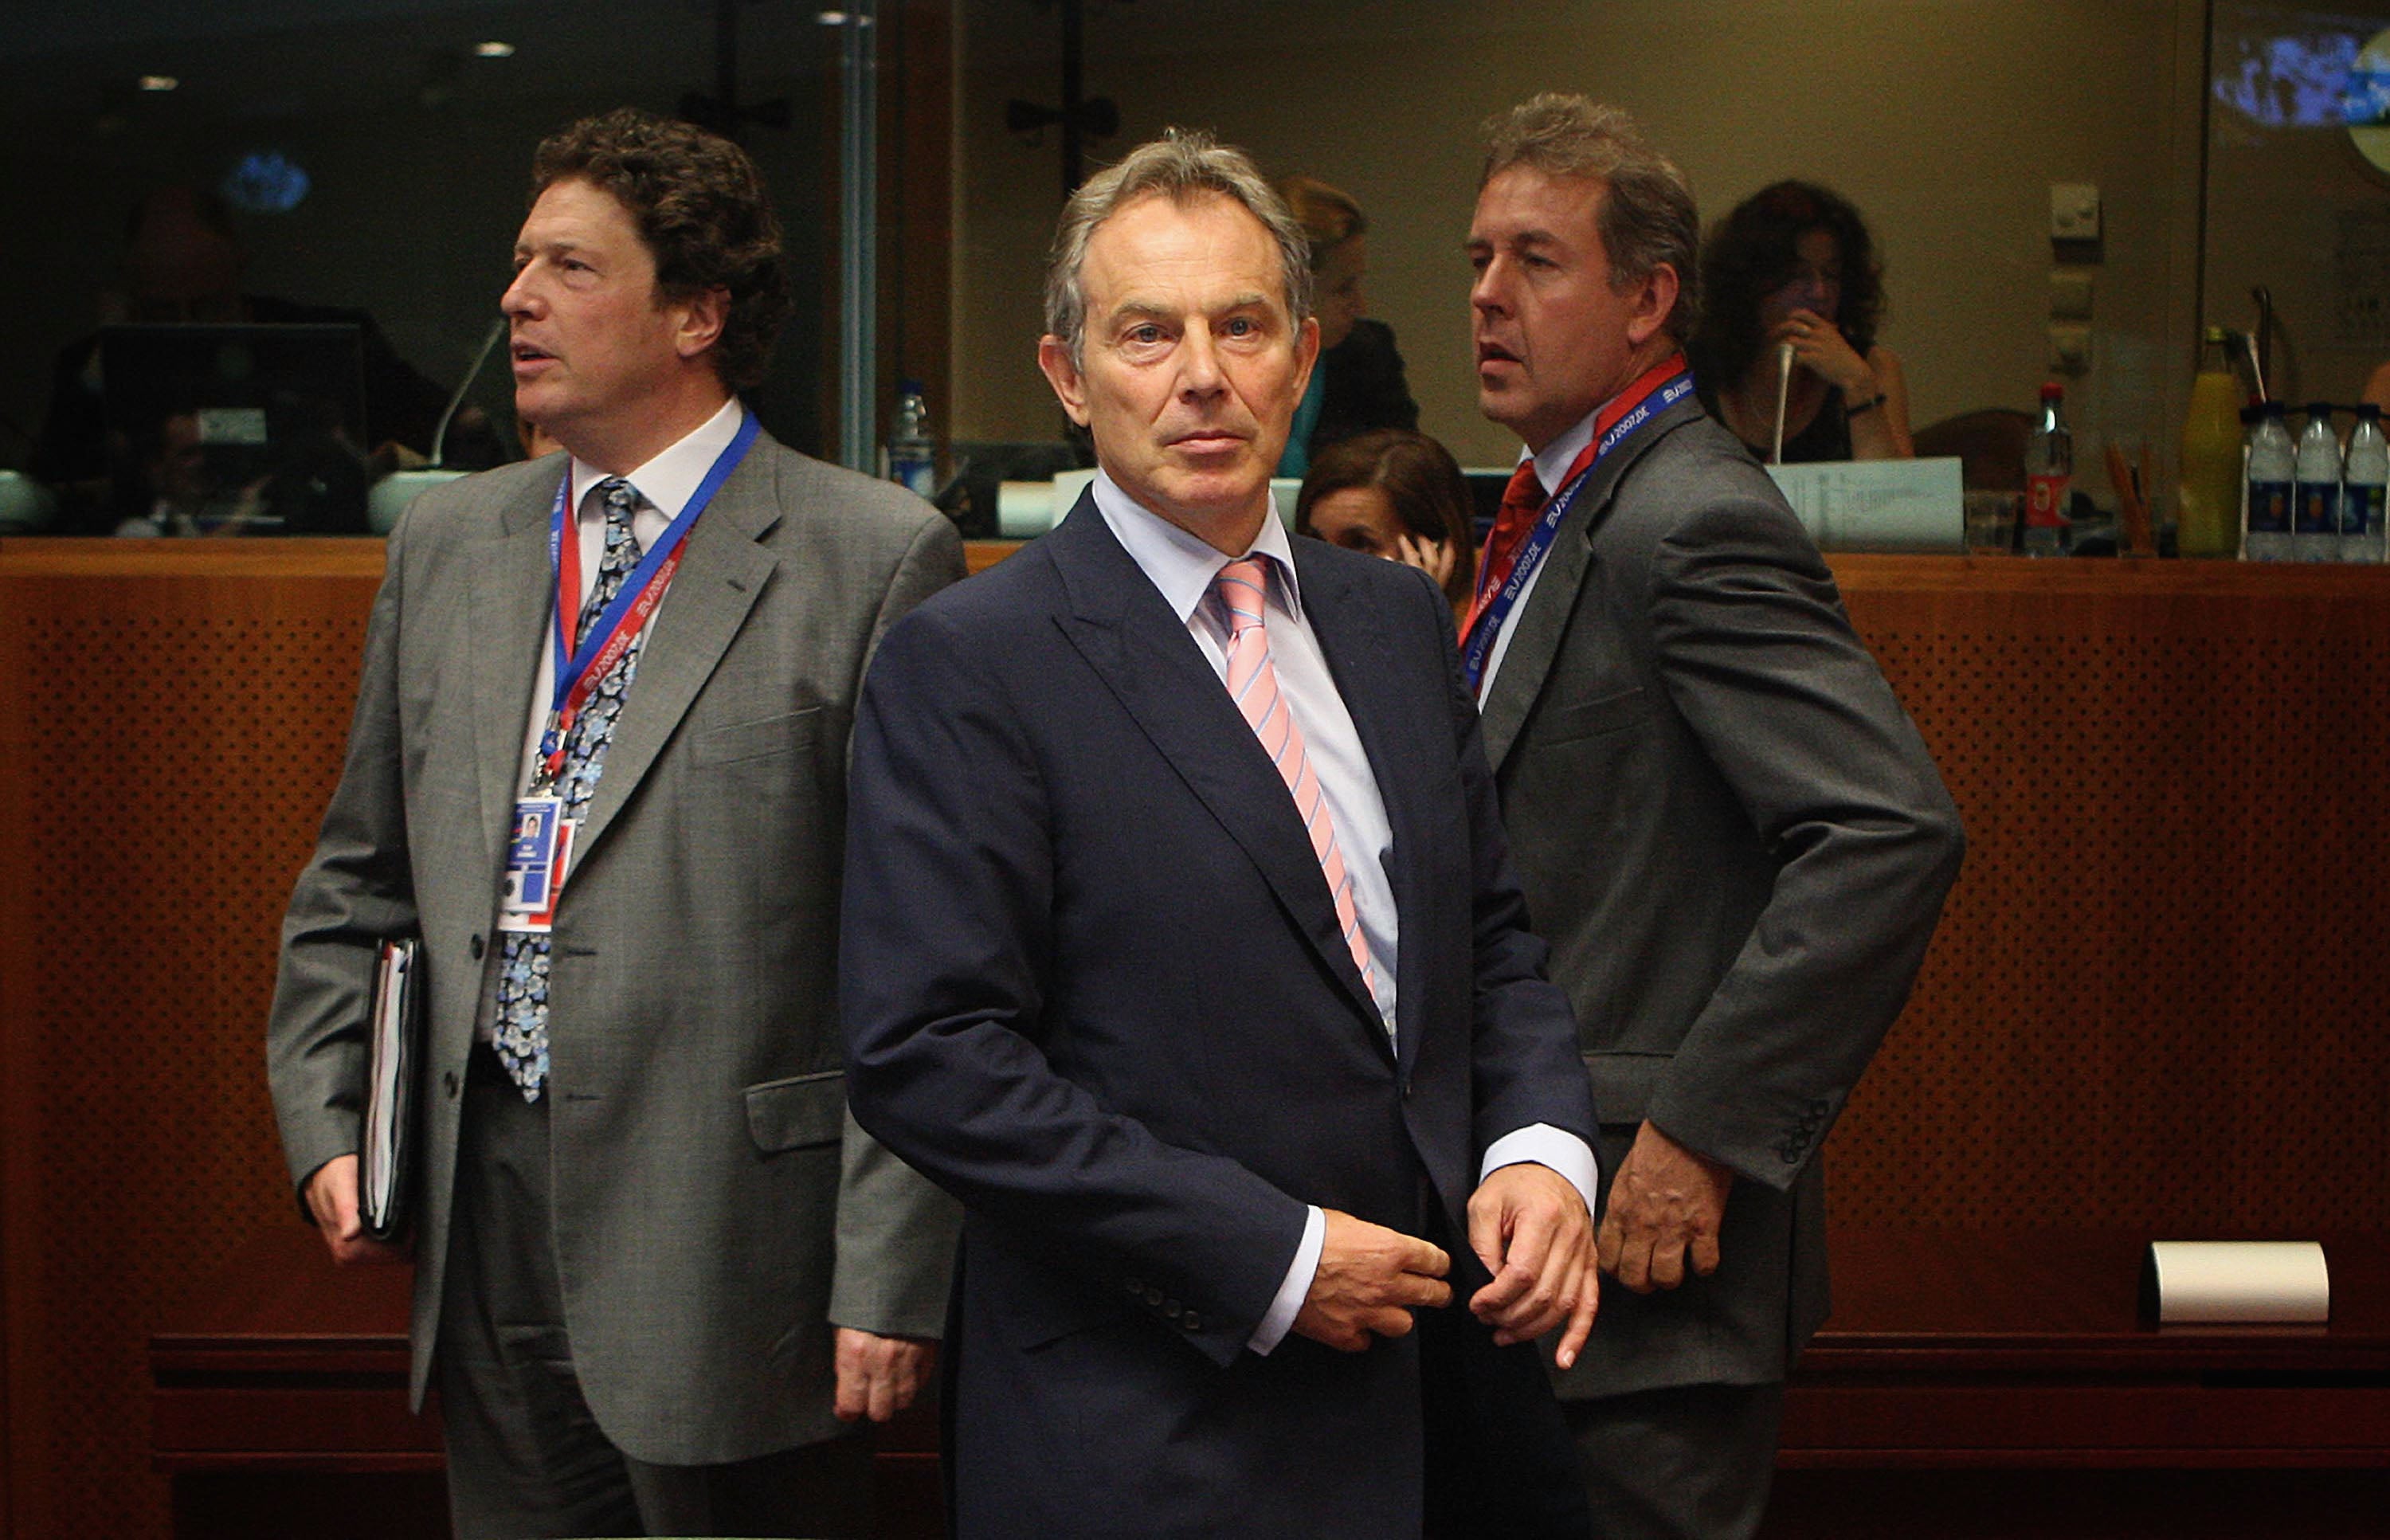 Darroch (right) with Tony Blair in Brussels, 2007